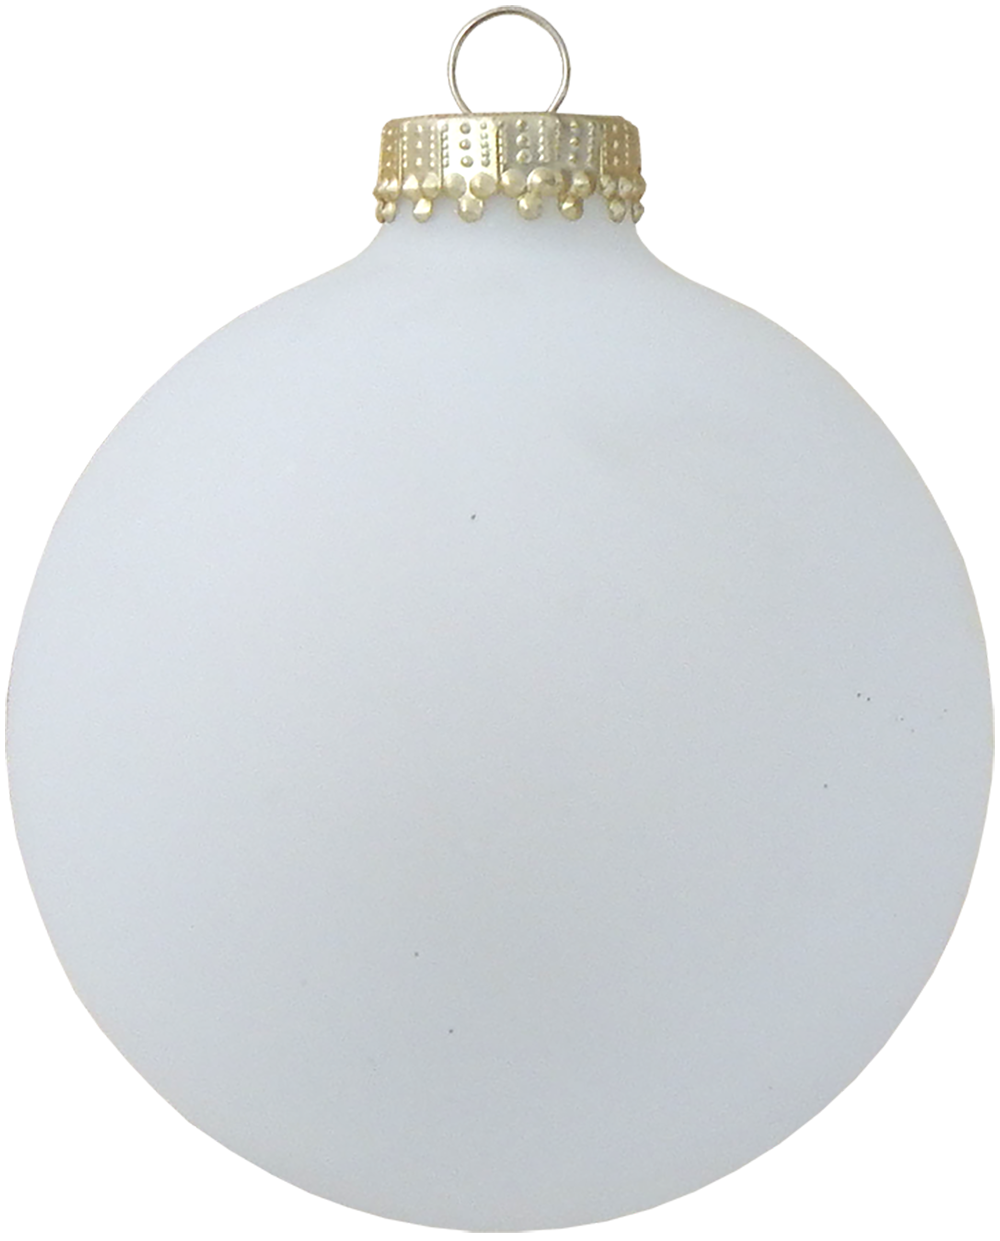 Glass Christmas Tree Ornaments - 80mm / 3.25" [4 Pieces] Designer Balls from Christmas By Krebs Seamless Hanging Holiday Decor (Frost Gold Cap)